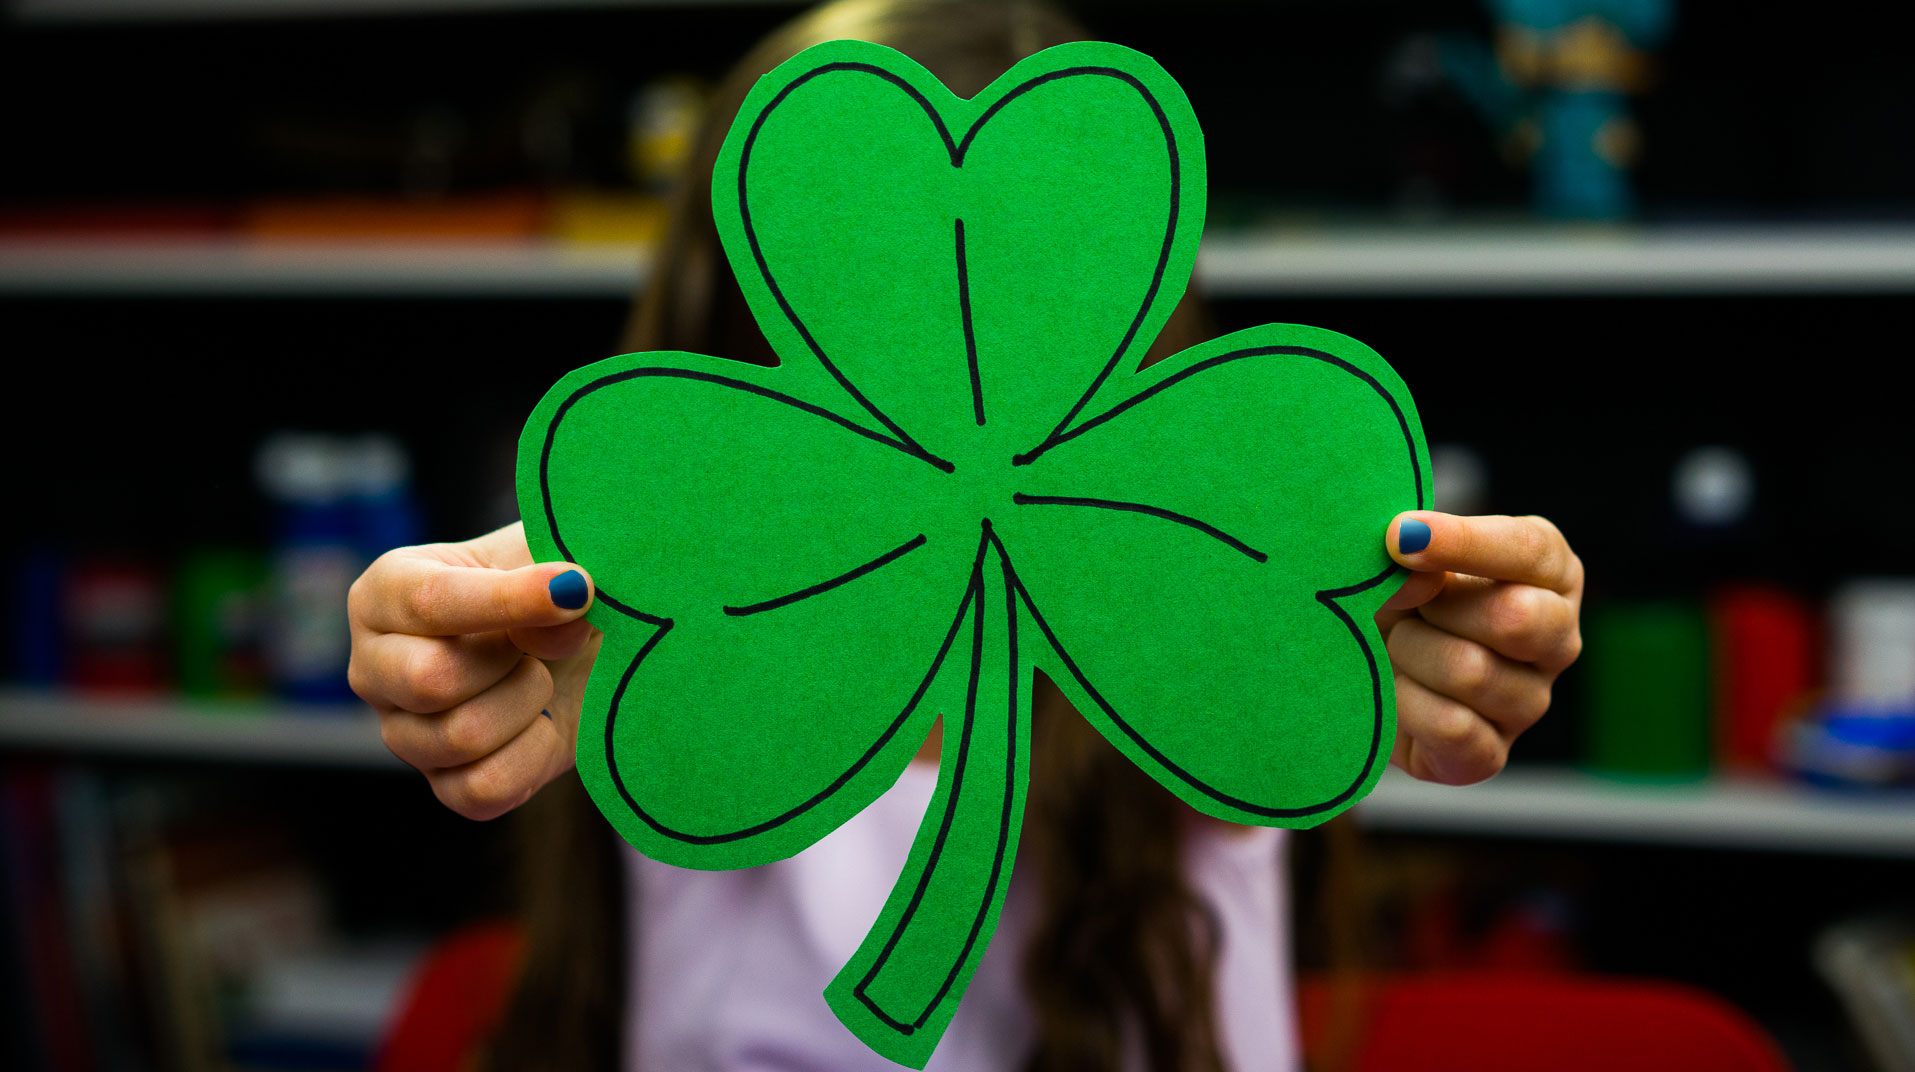 How To Draw A Shamrock Art For Kids Hub